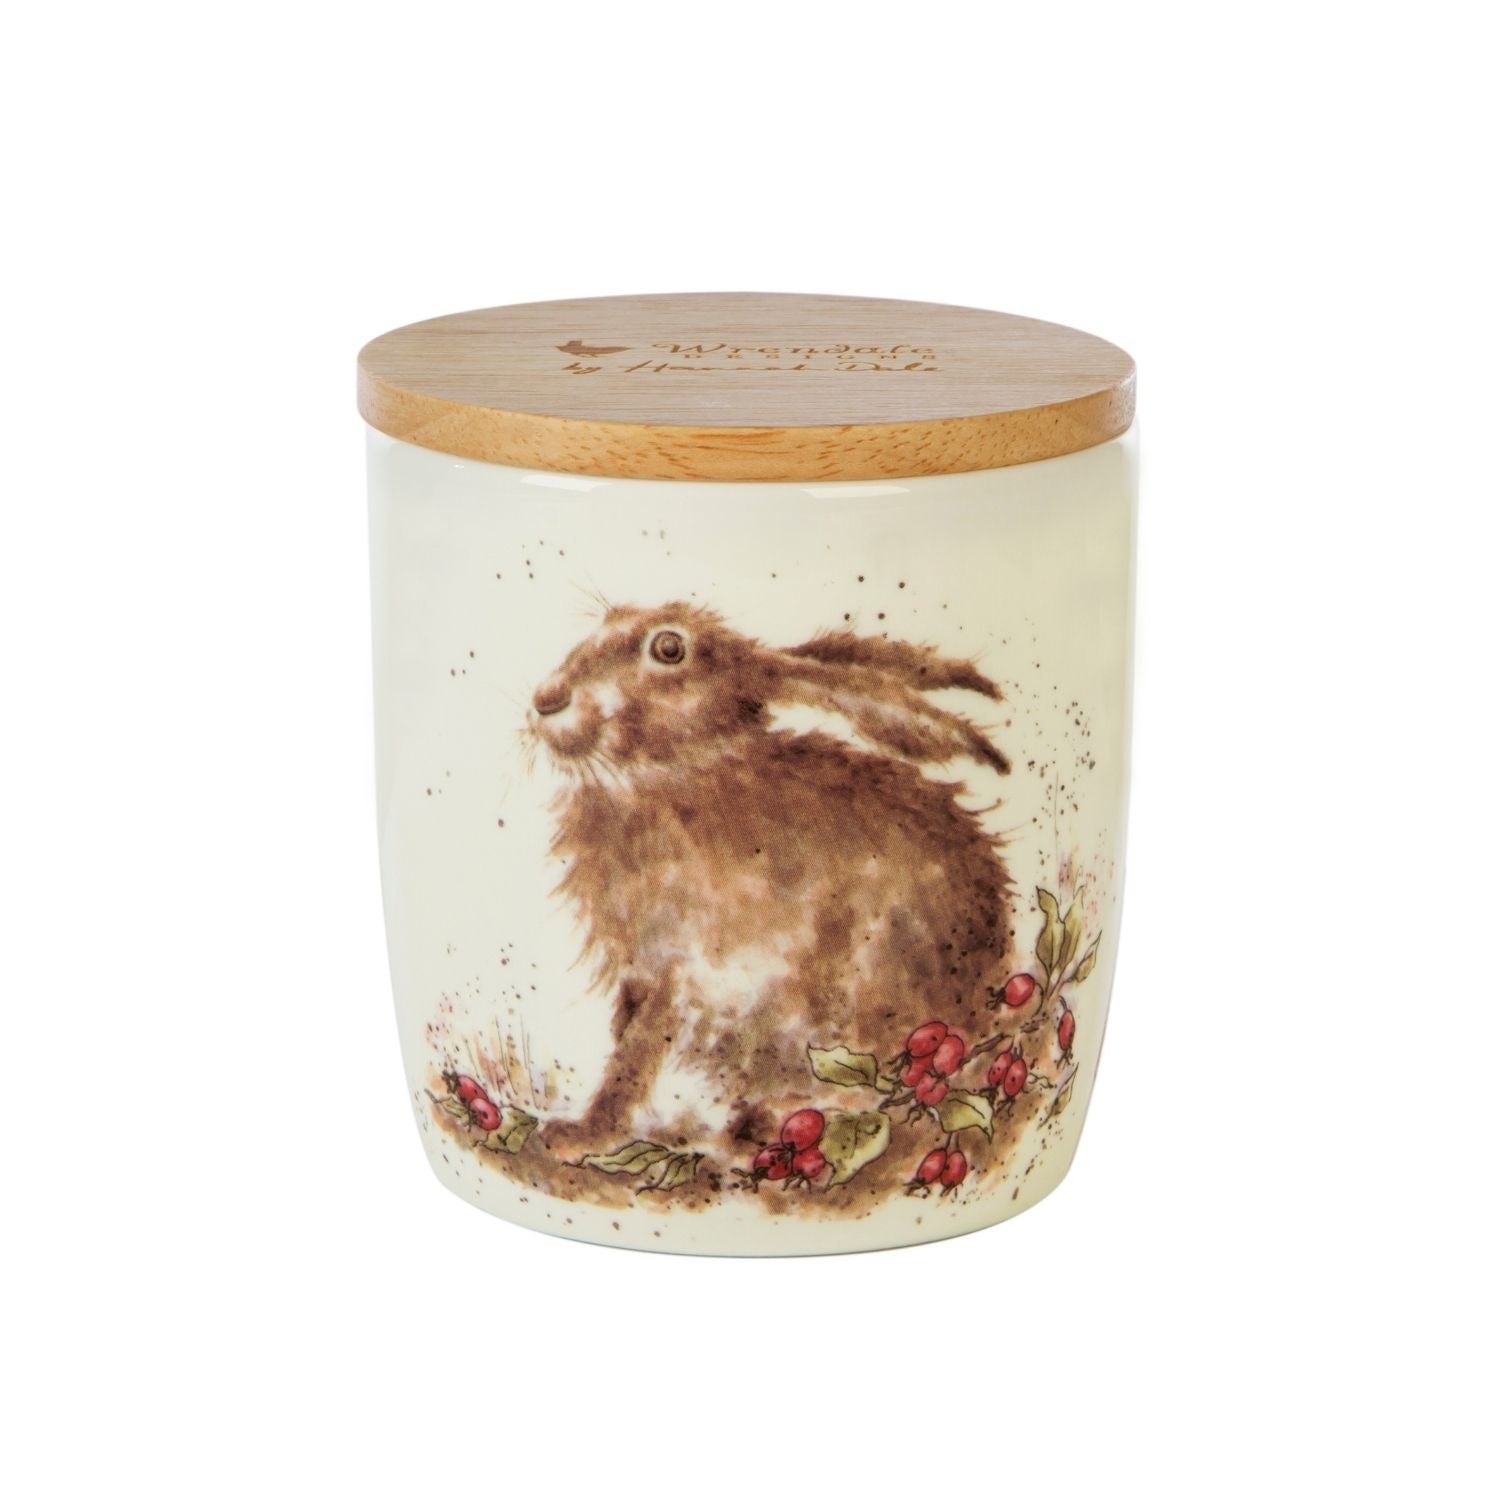 Wax Lyrical Candle in Jar - Hedgerow 1 Shaws Department Stores